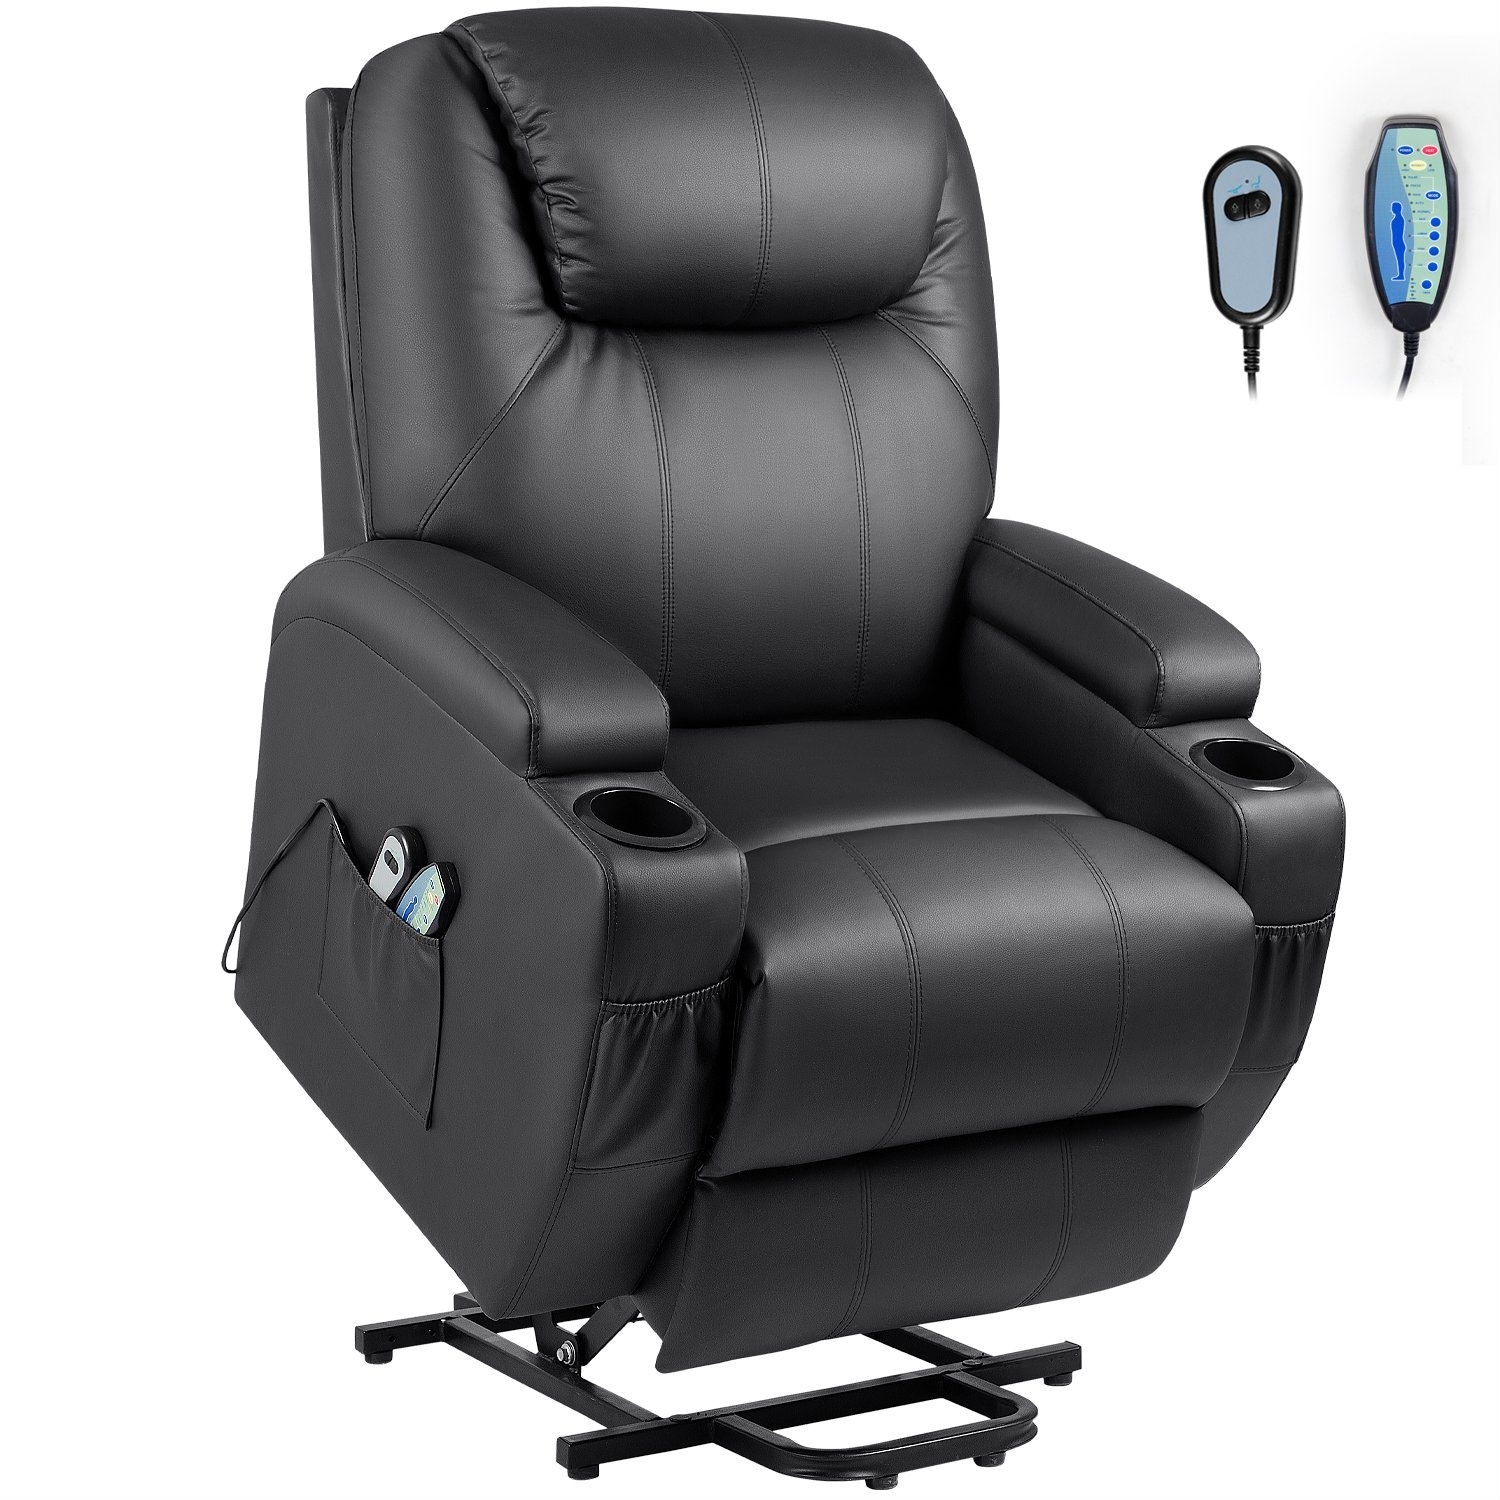 https://ak1.ostkcdn.com/images/products/is/images/direct/ecc38ef452be8e5b91f576c0044810810cd1e8d8/Power-Lift-Recliner-with-Massage-and-Heat%2C-Black-Faux-Leather.jpg